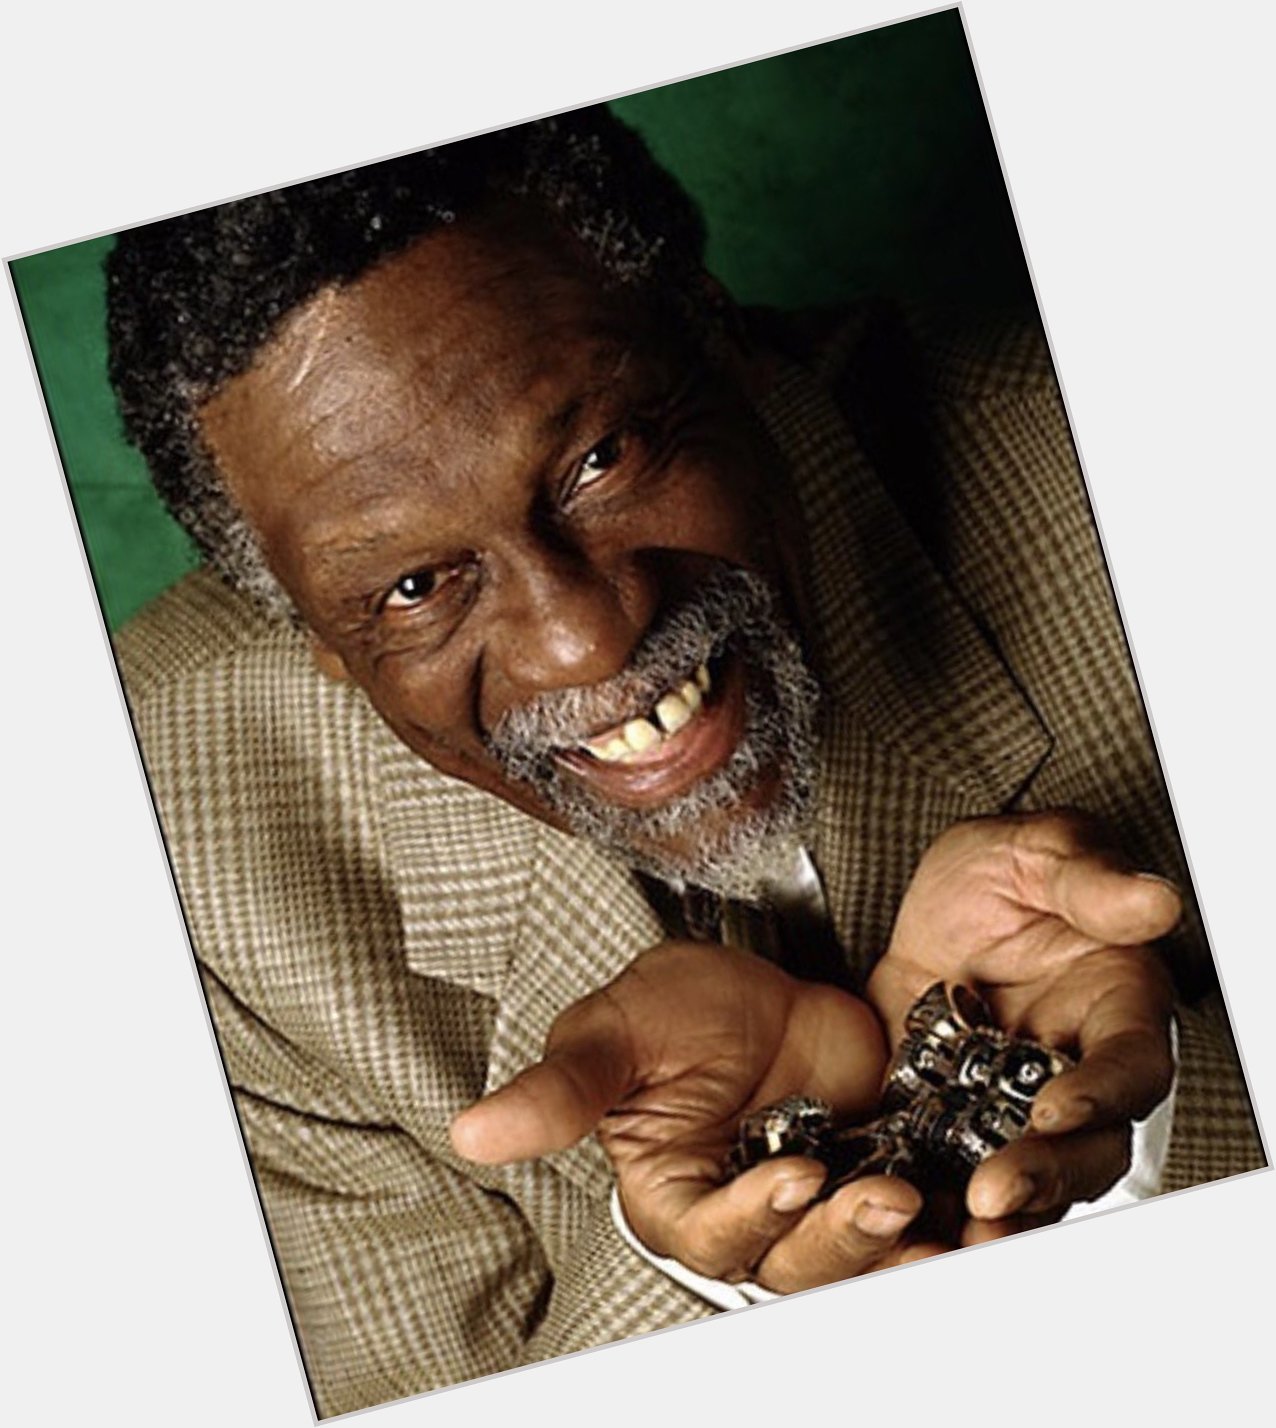 Happy birthday to Bill Russell! 

13 years, 11 rings 